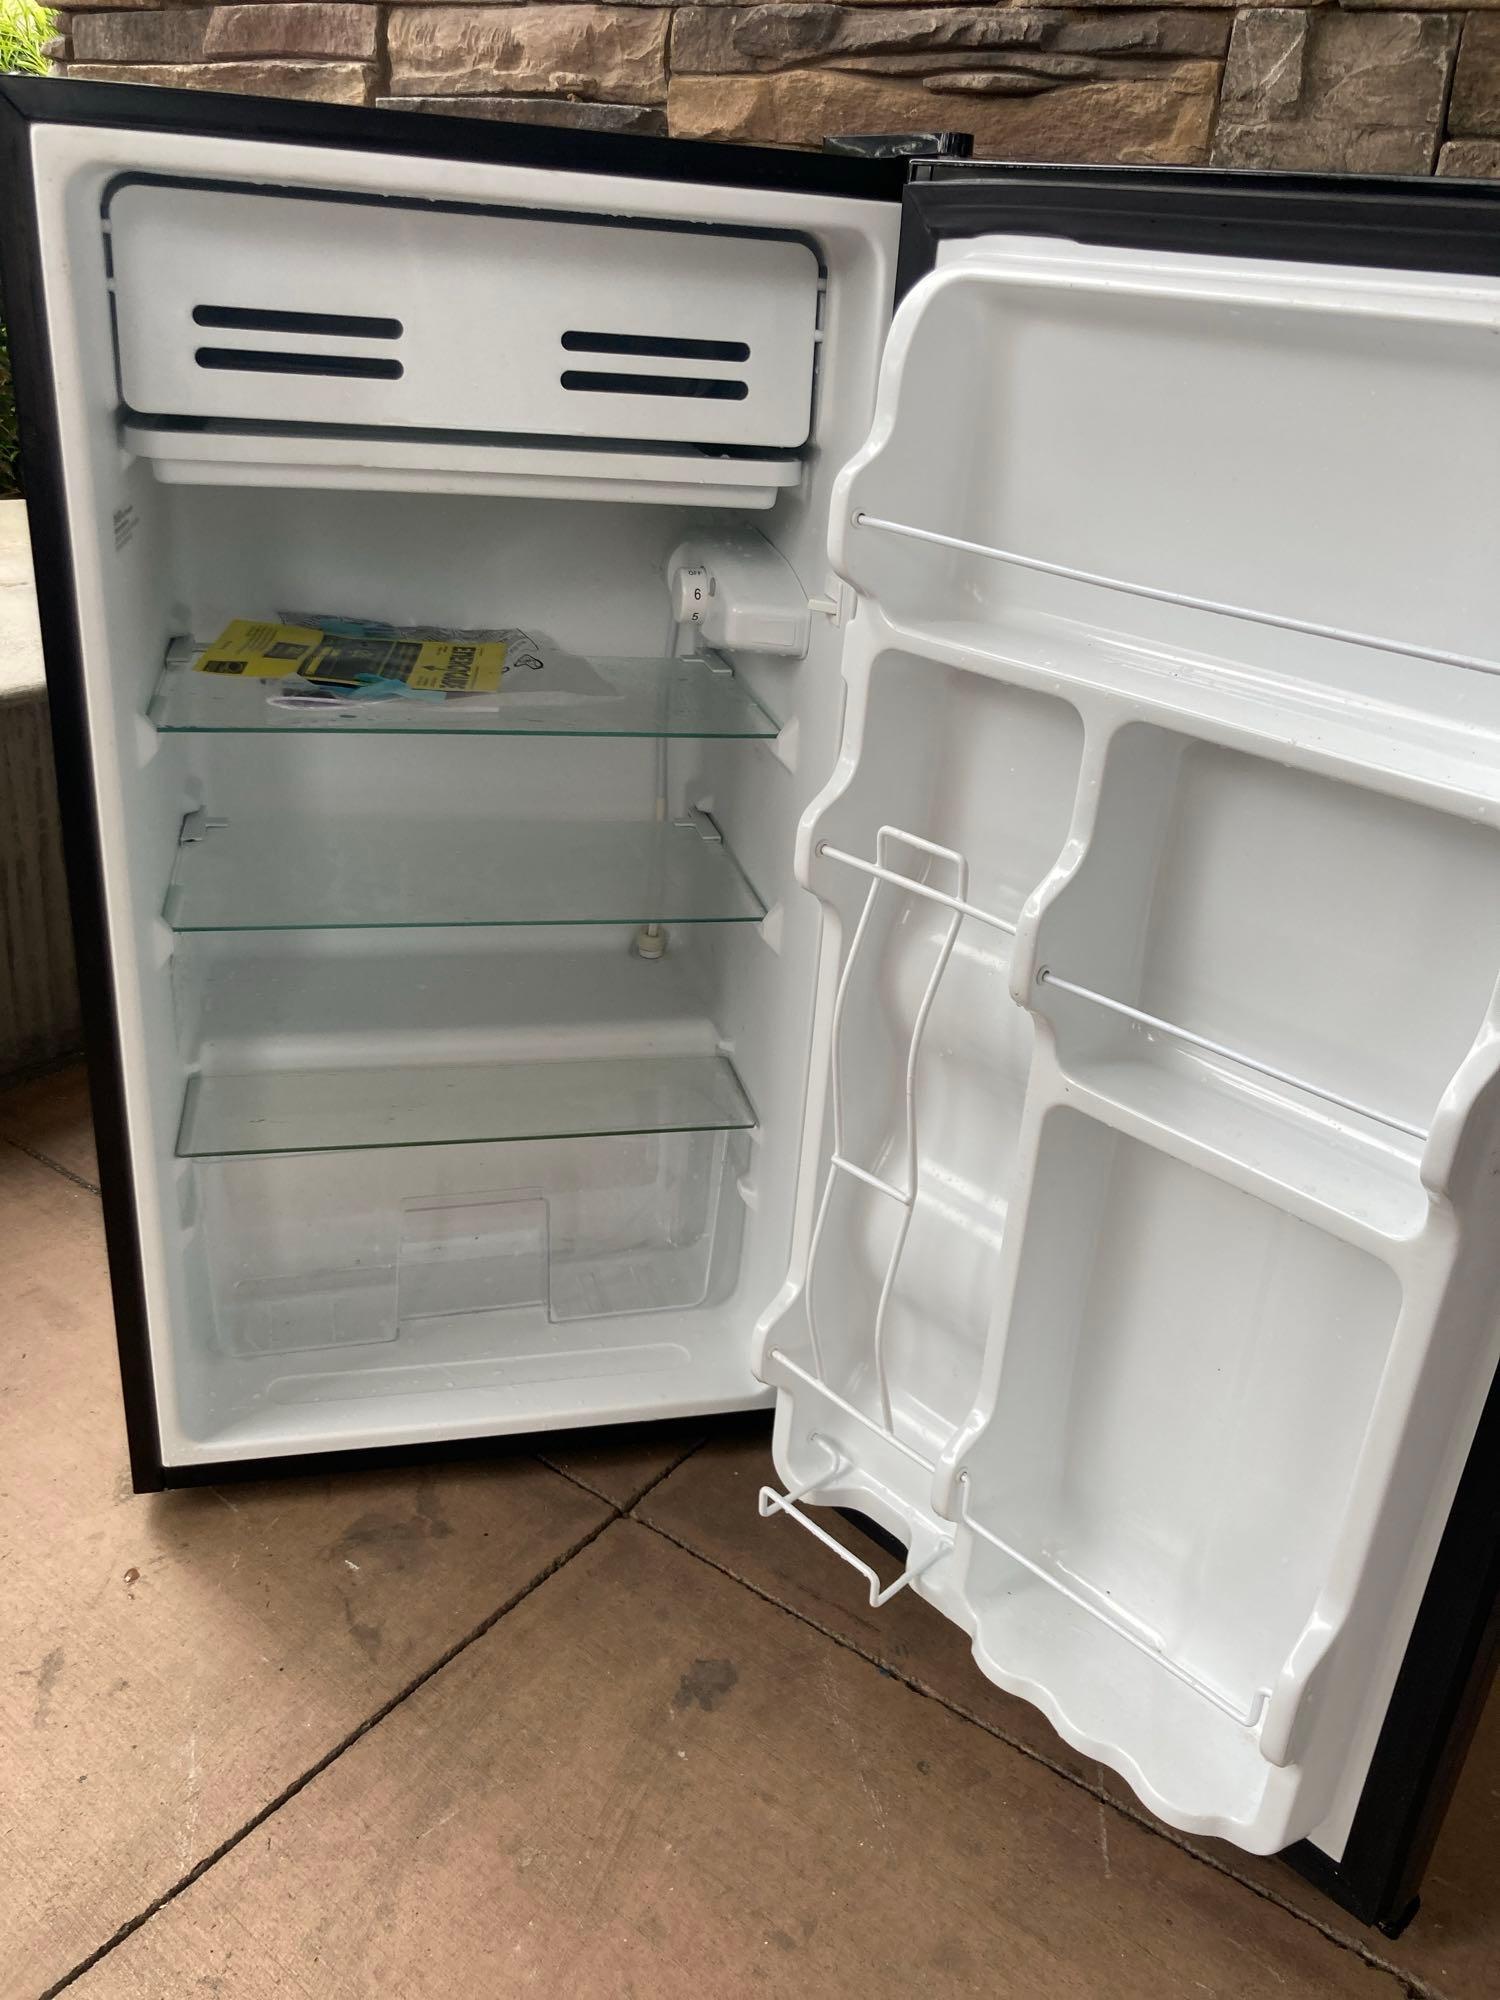 Midea 3.3 cu ft Compact Refrigerator*COLD*PREVIOUSLY INSTALLED*